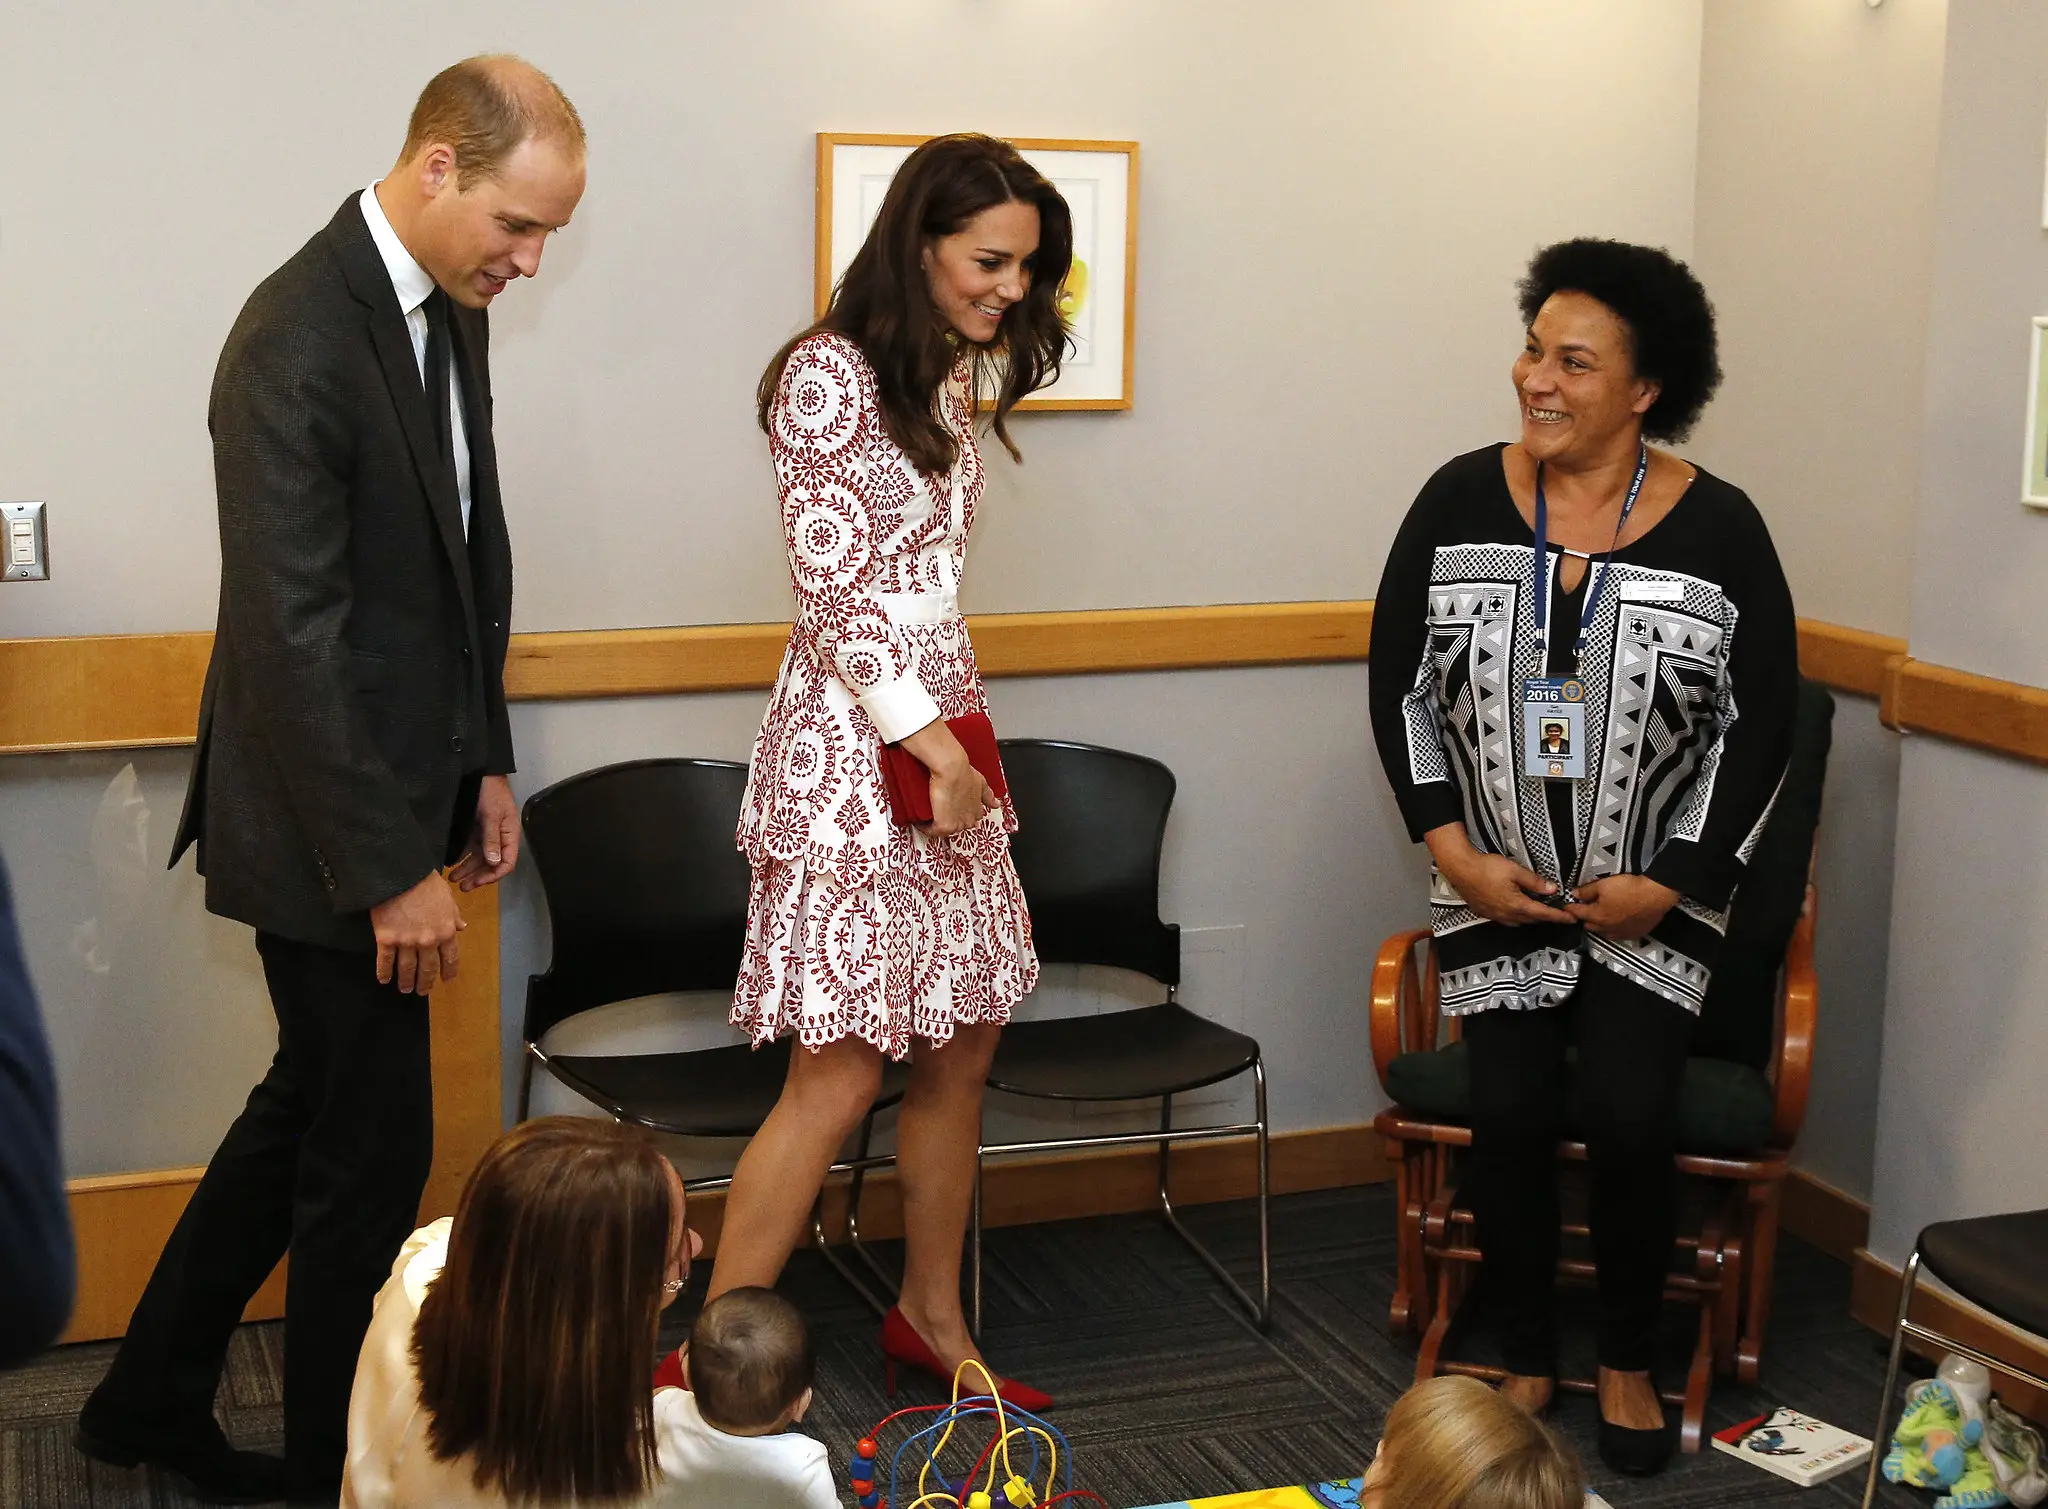 The Duke and Duchess of Cambridge visited sheway in vancouver